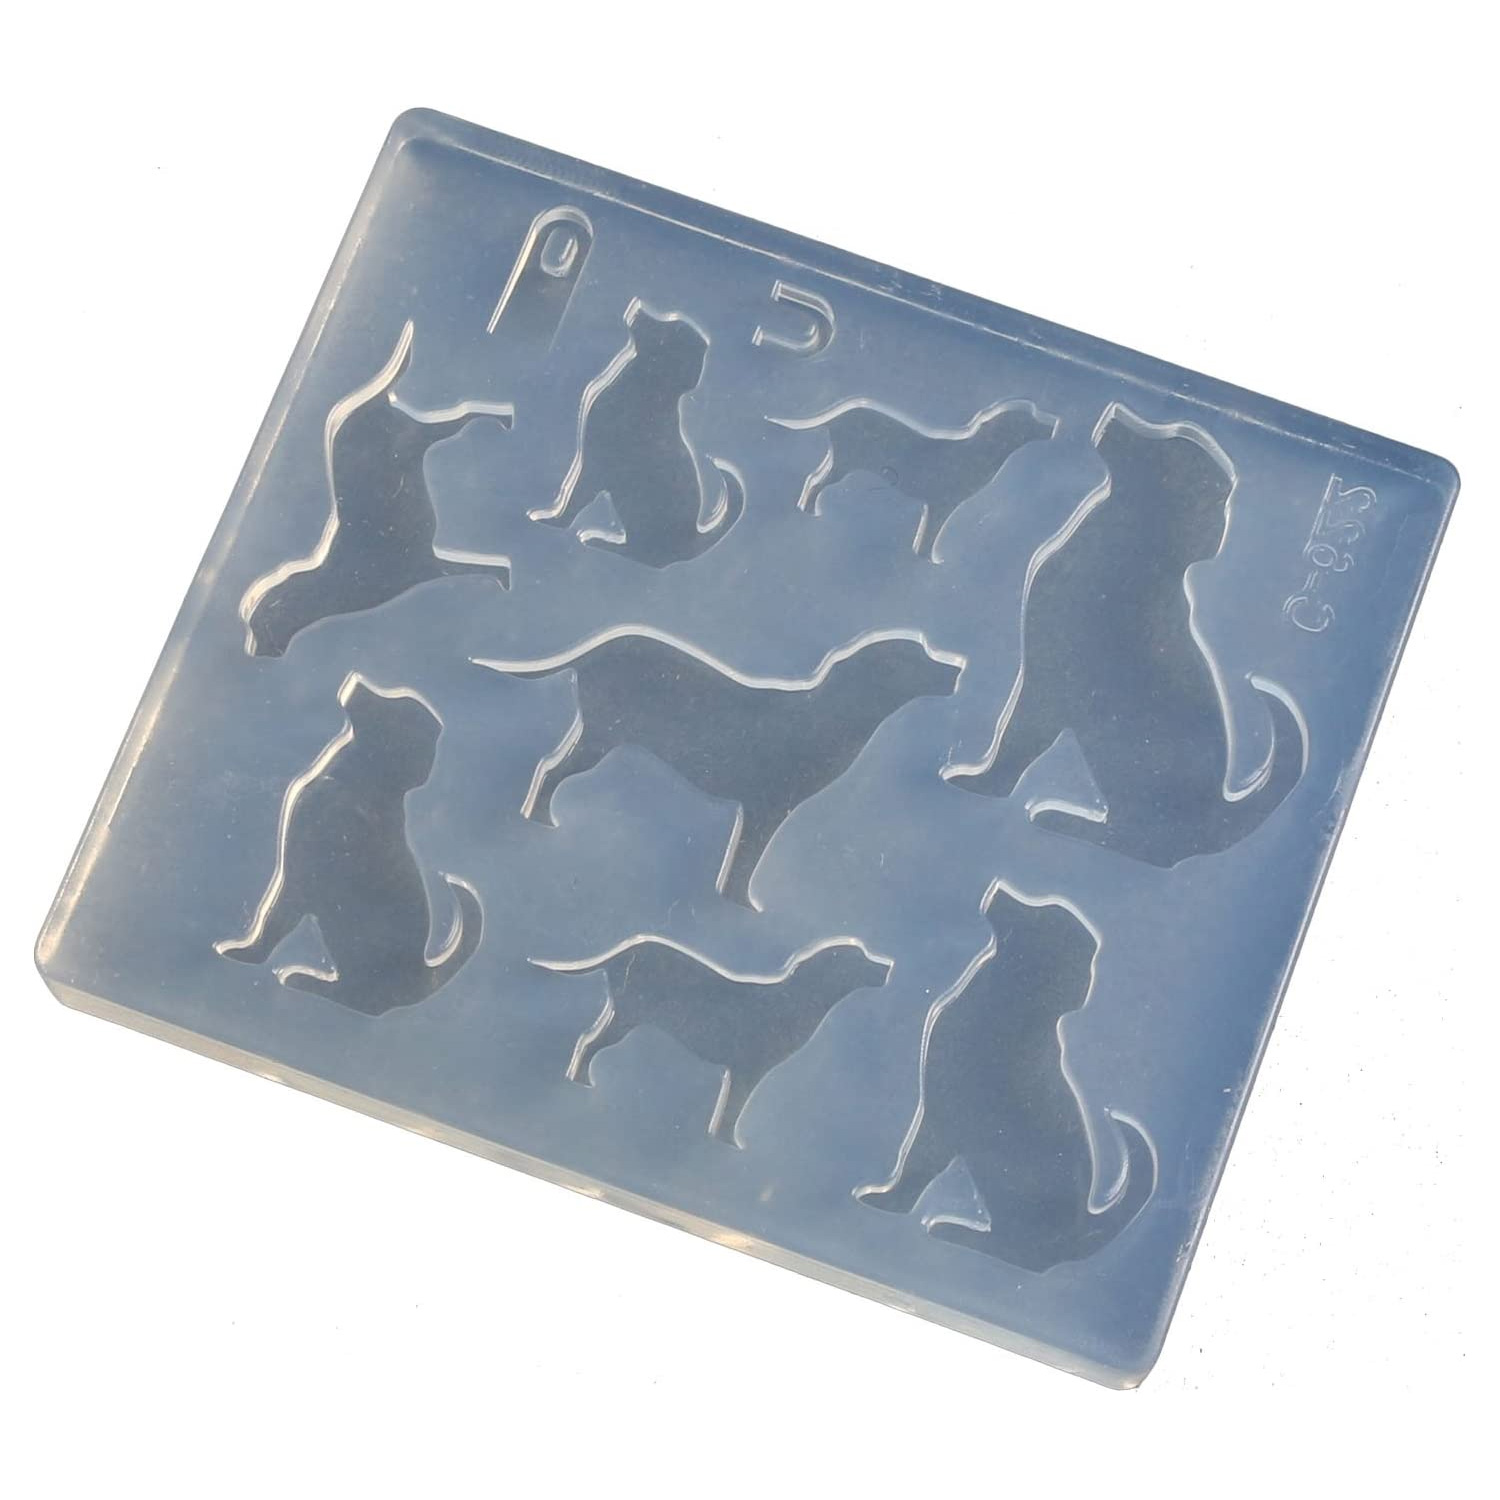 KAM-REJ-622  Resin Crafting Silicone Mold  (pcs)